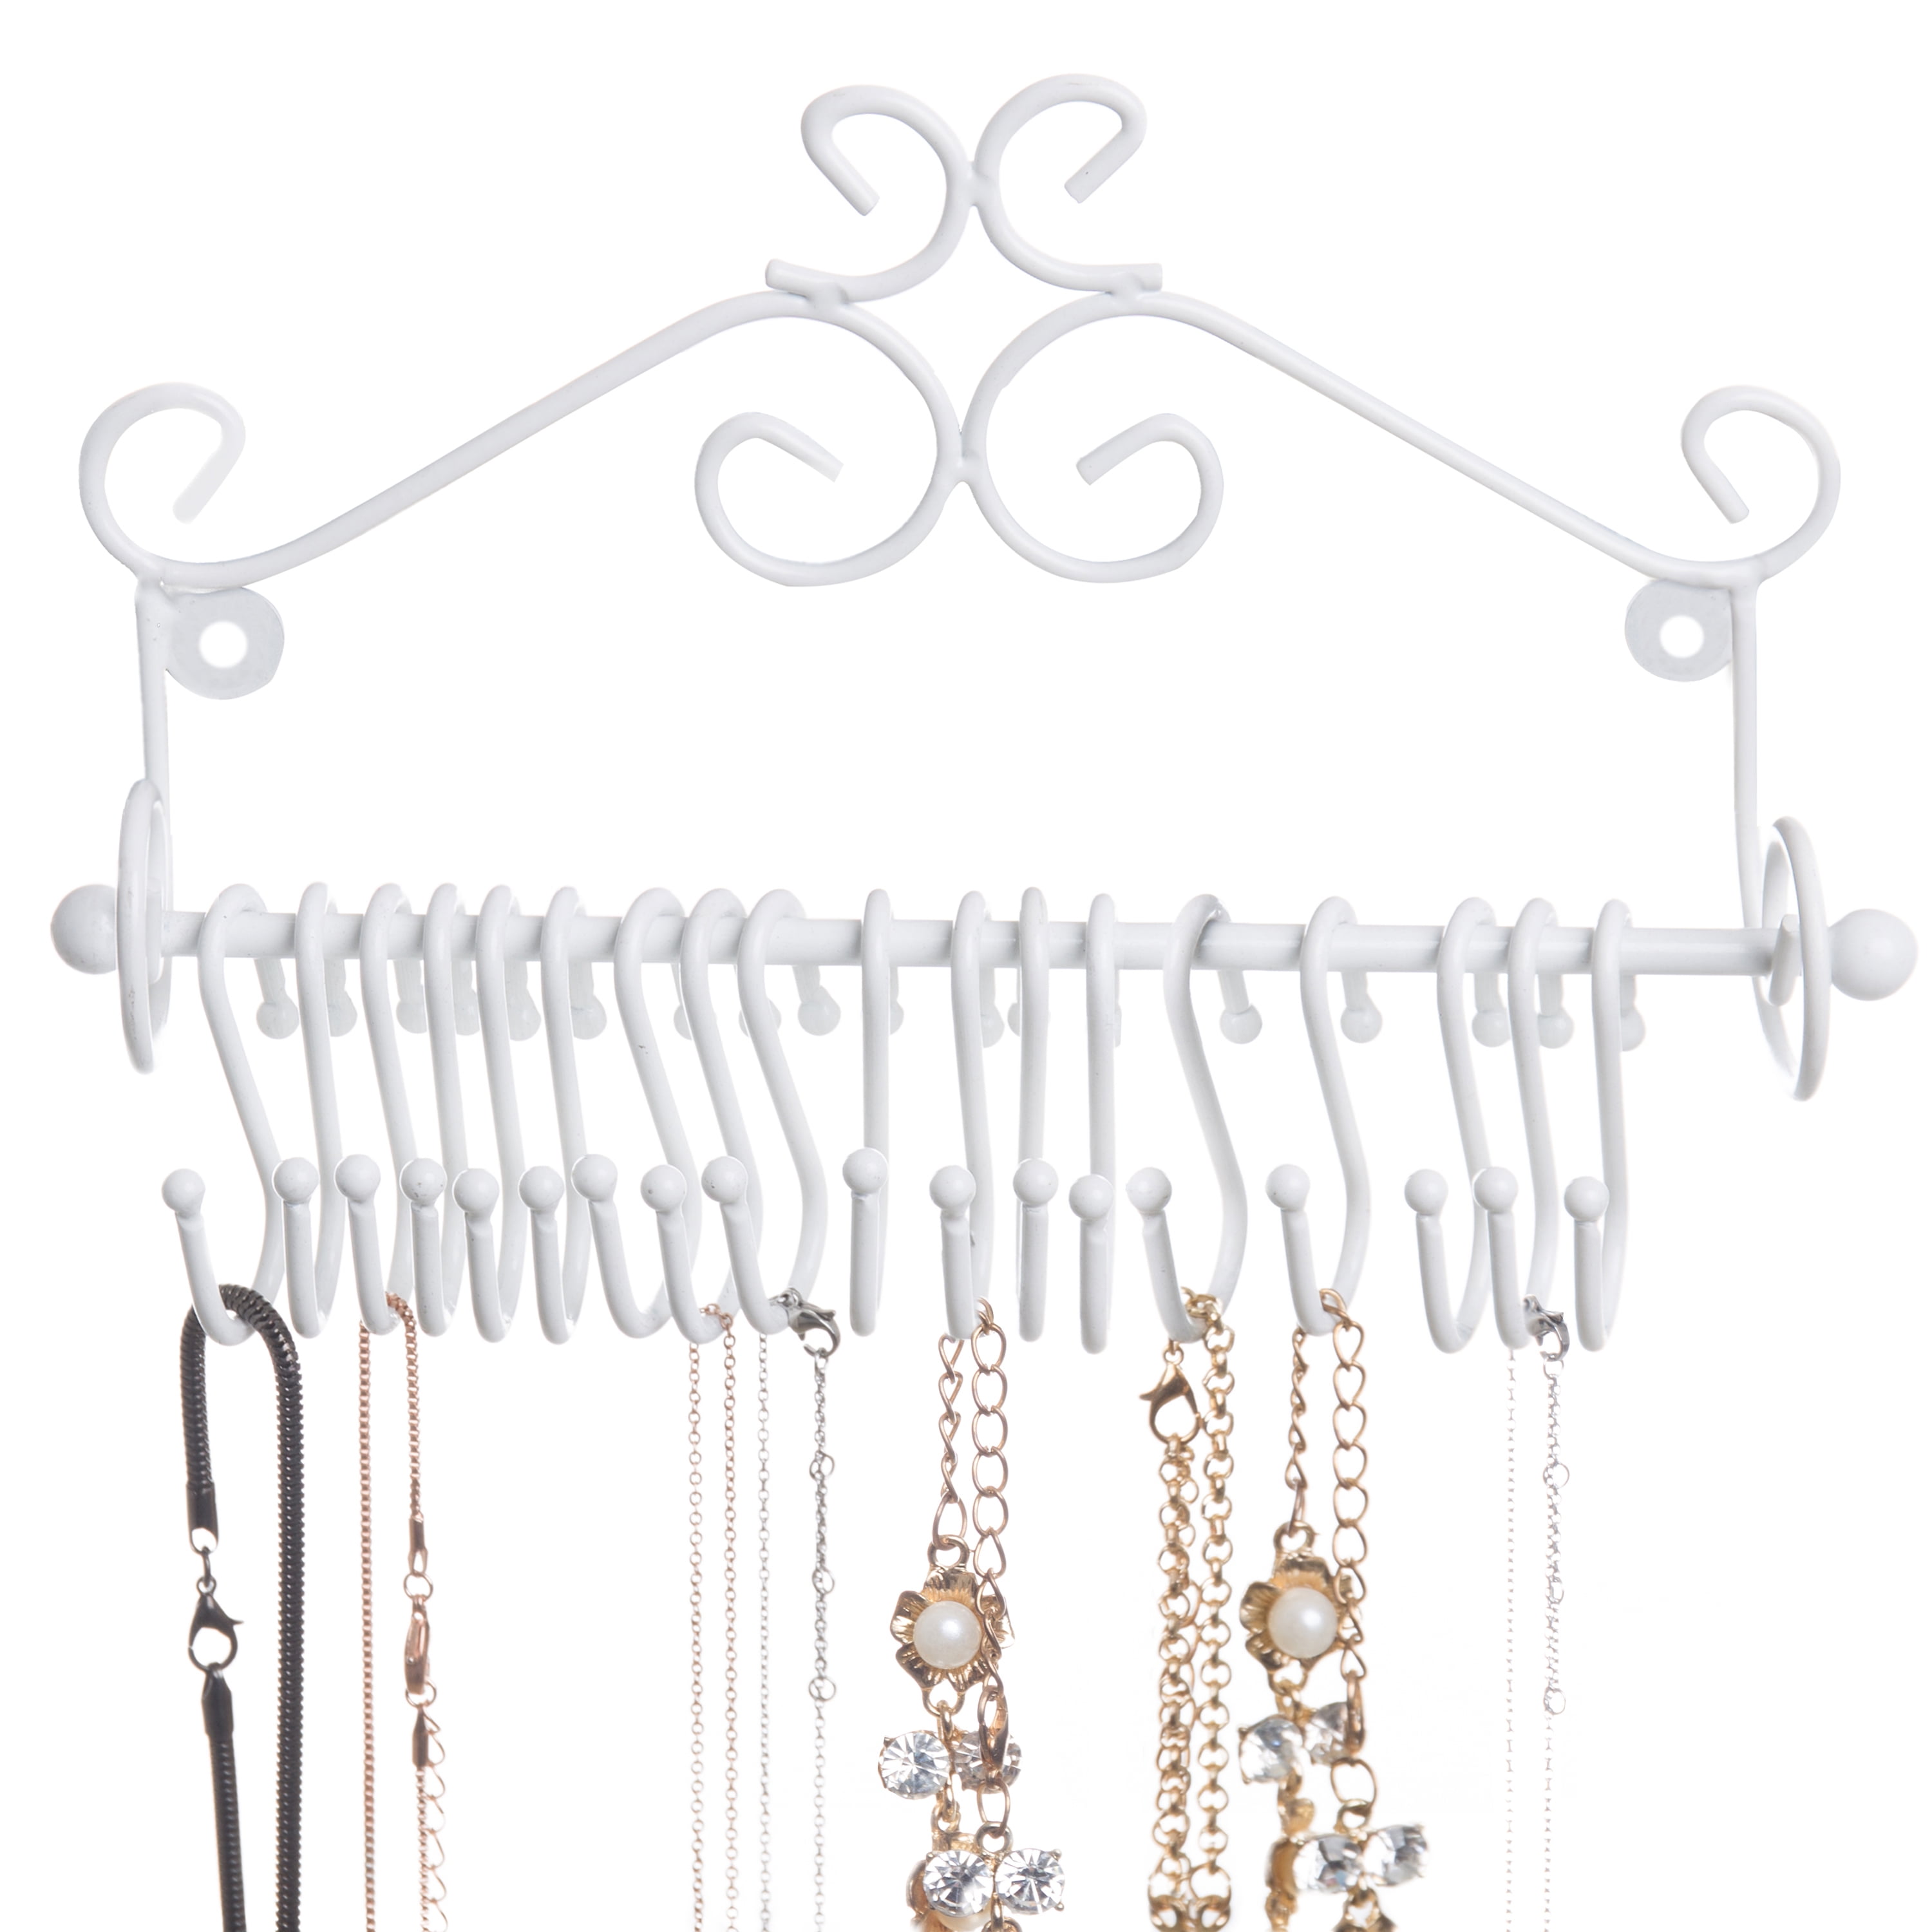 MyGift Wall-Mounted Brass-Tone Metal Scrollwork Design Jewelry Organizer Rack w/ 20 Hanging S-Hooks, Women's, Size: Small, Gold